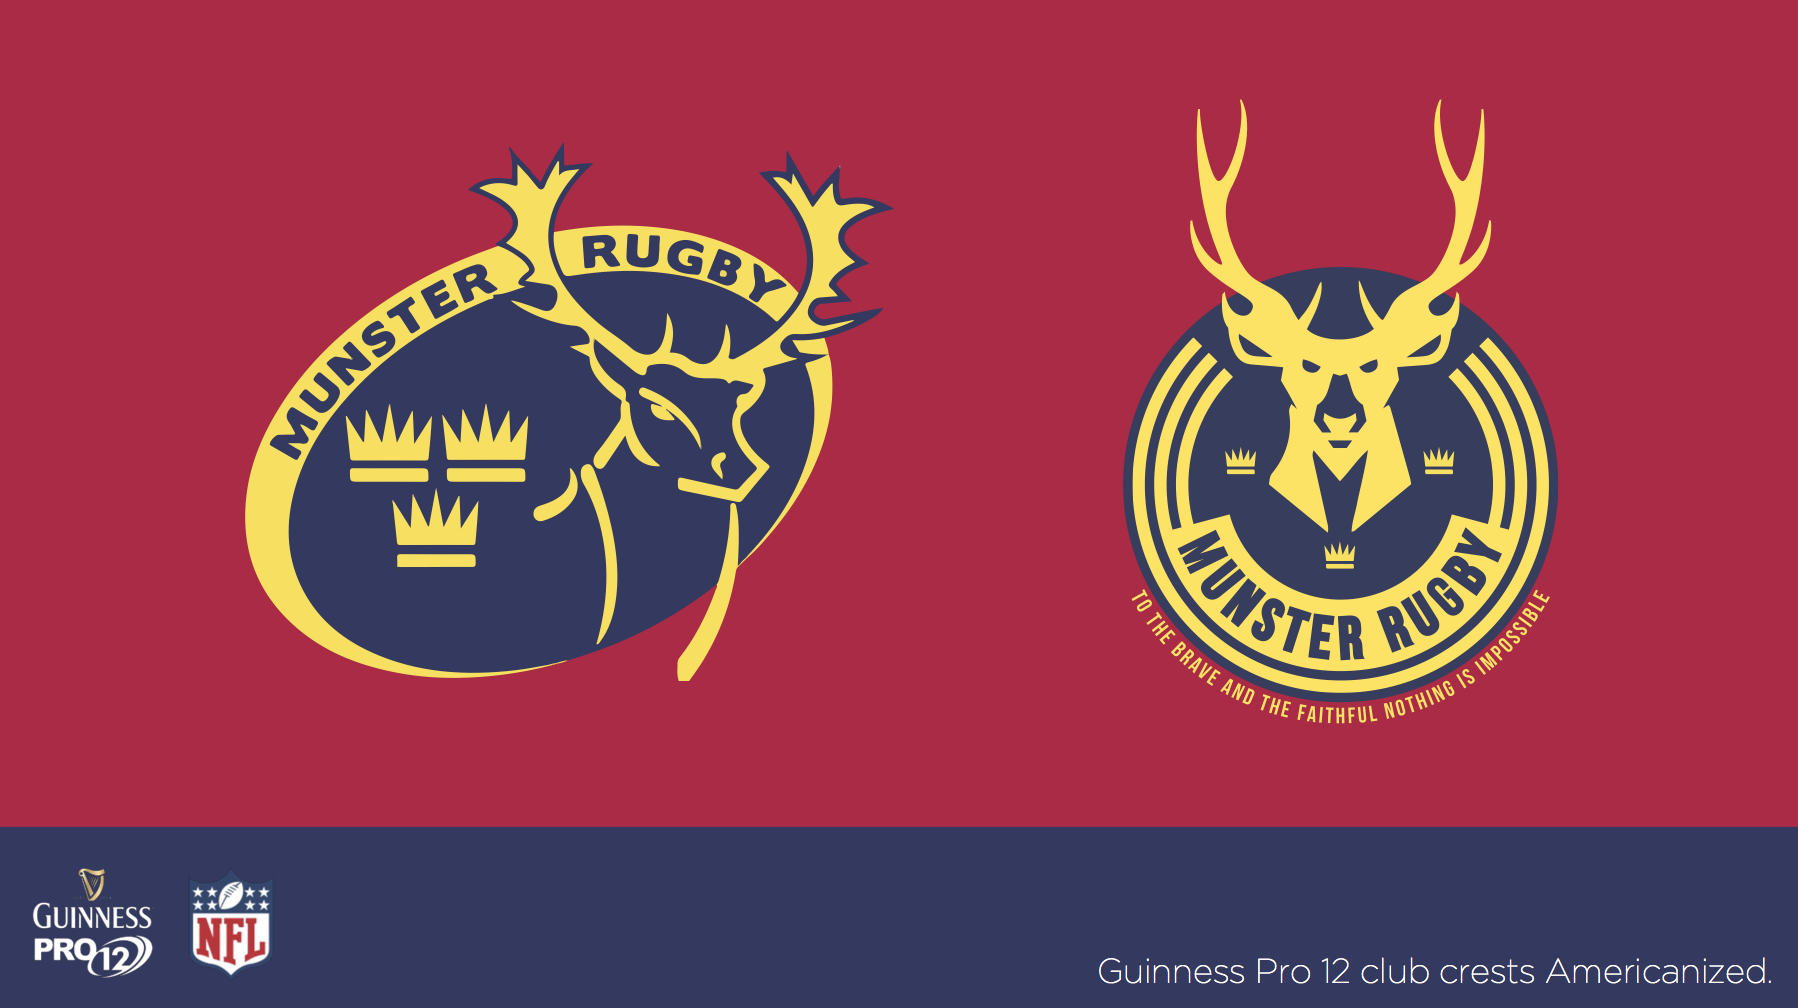 Someone redesigned every Guinness Pro 14 crest as NFL logos.